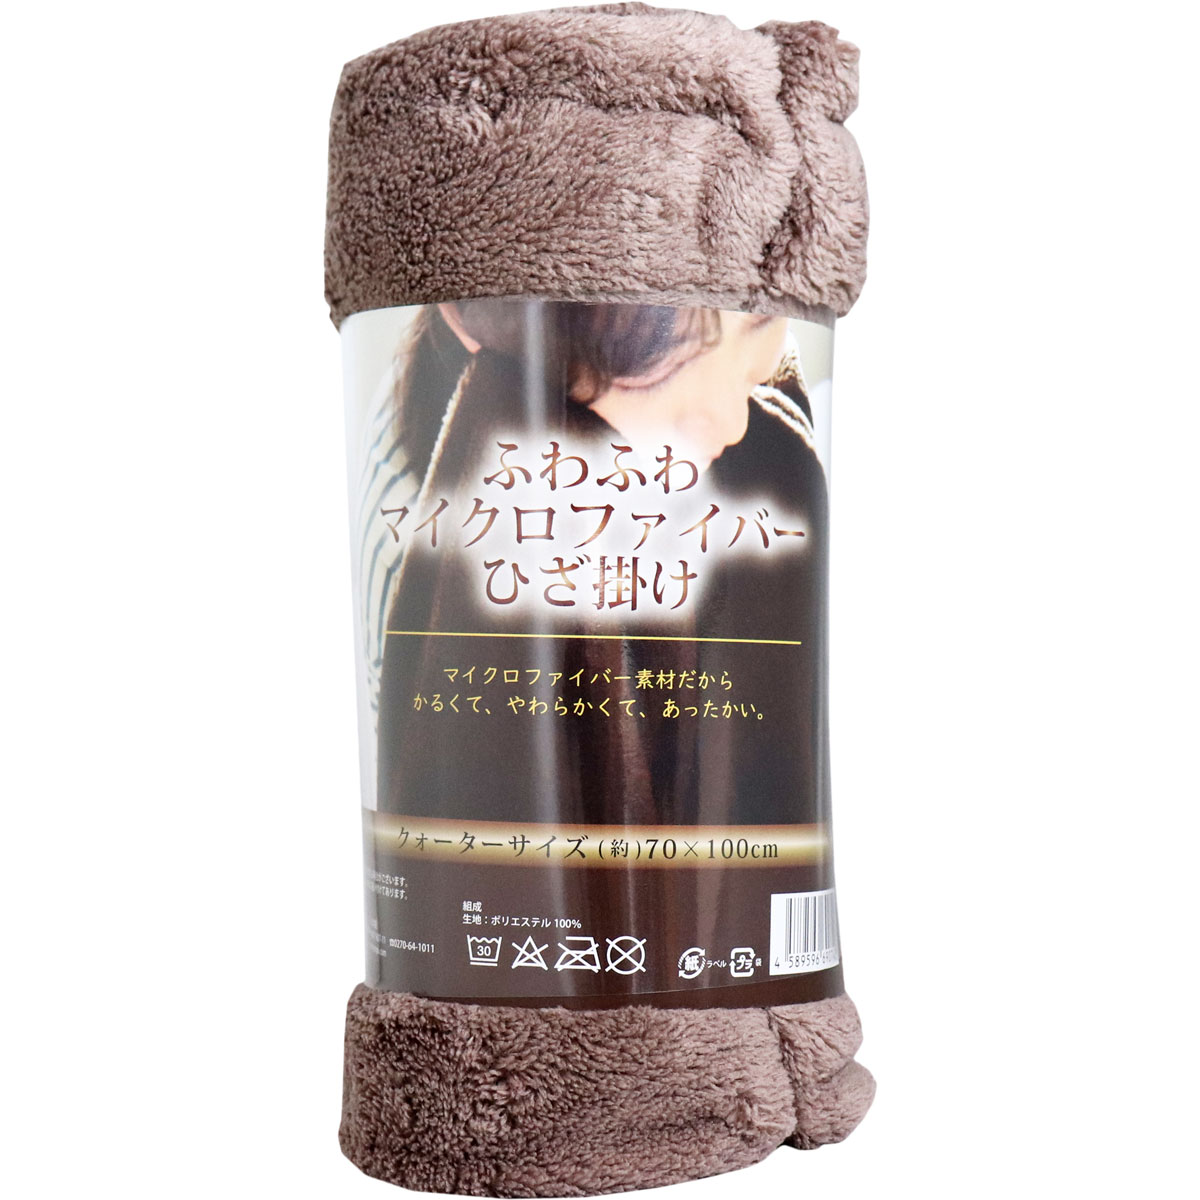 Picture of Brown color Fluffy Microfiber Lap Robe